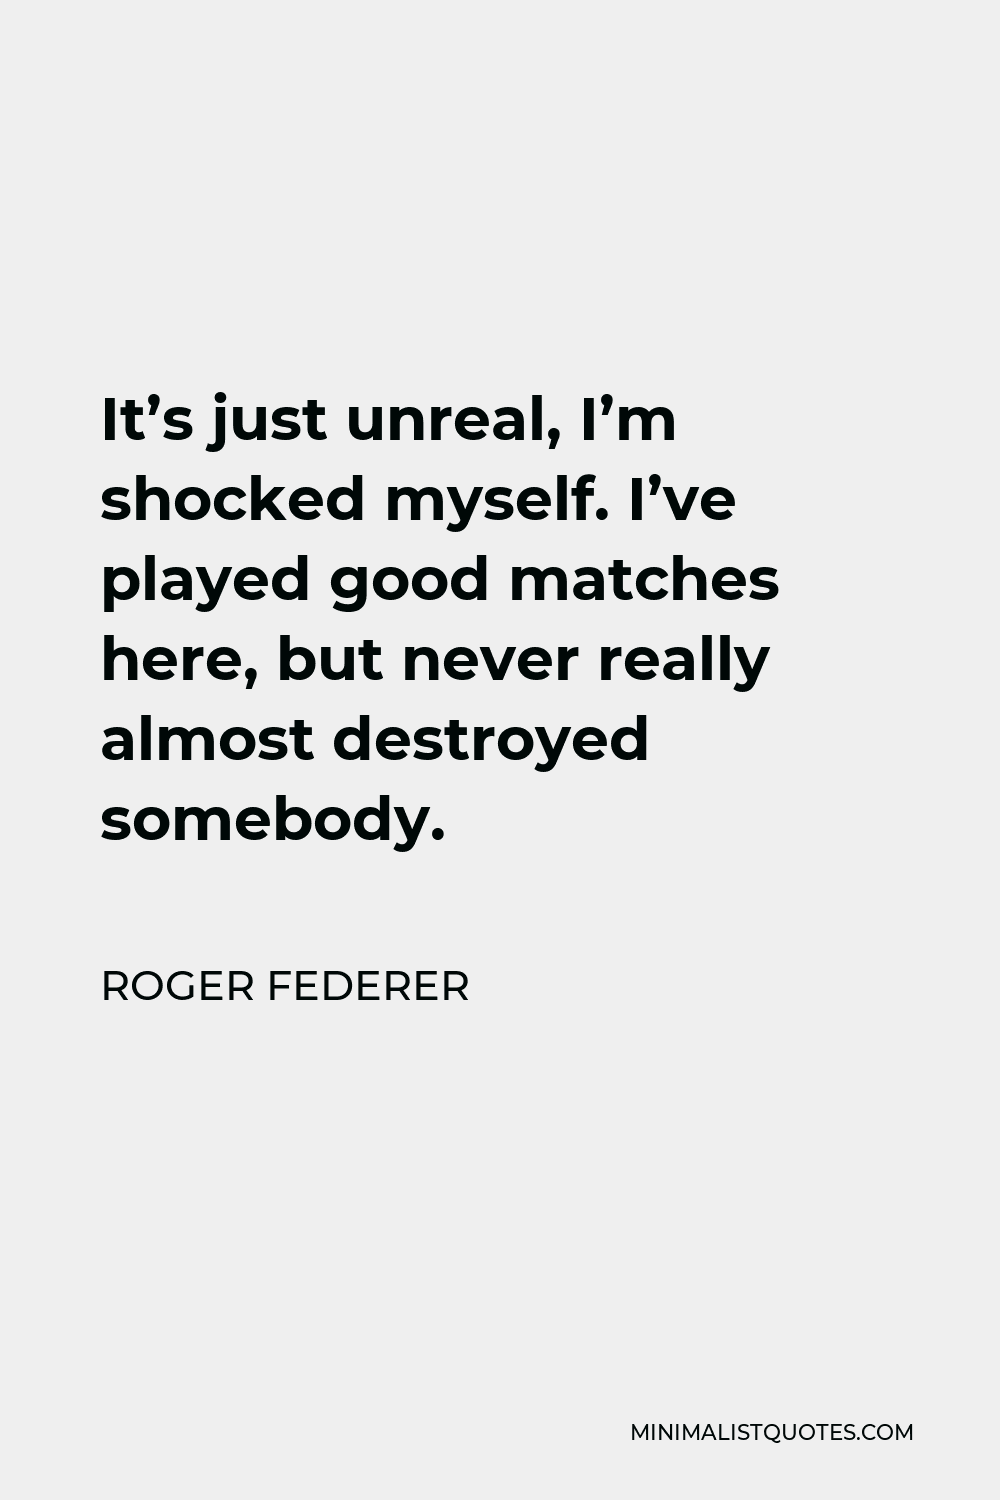 Roger Federer Quote - It’s just unreal, I’m shocked myself. I’ve played good matches here, but never really almost destroyed somebody.